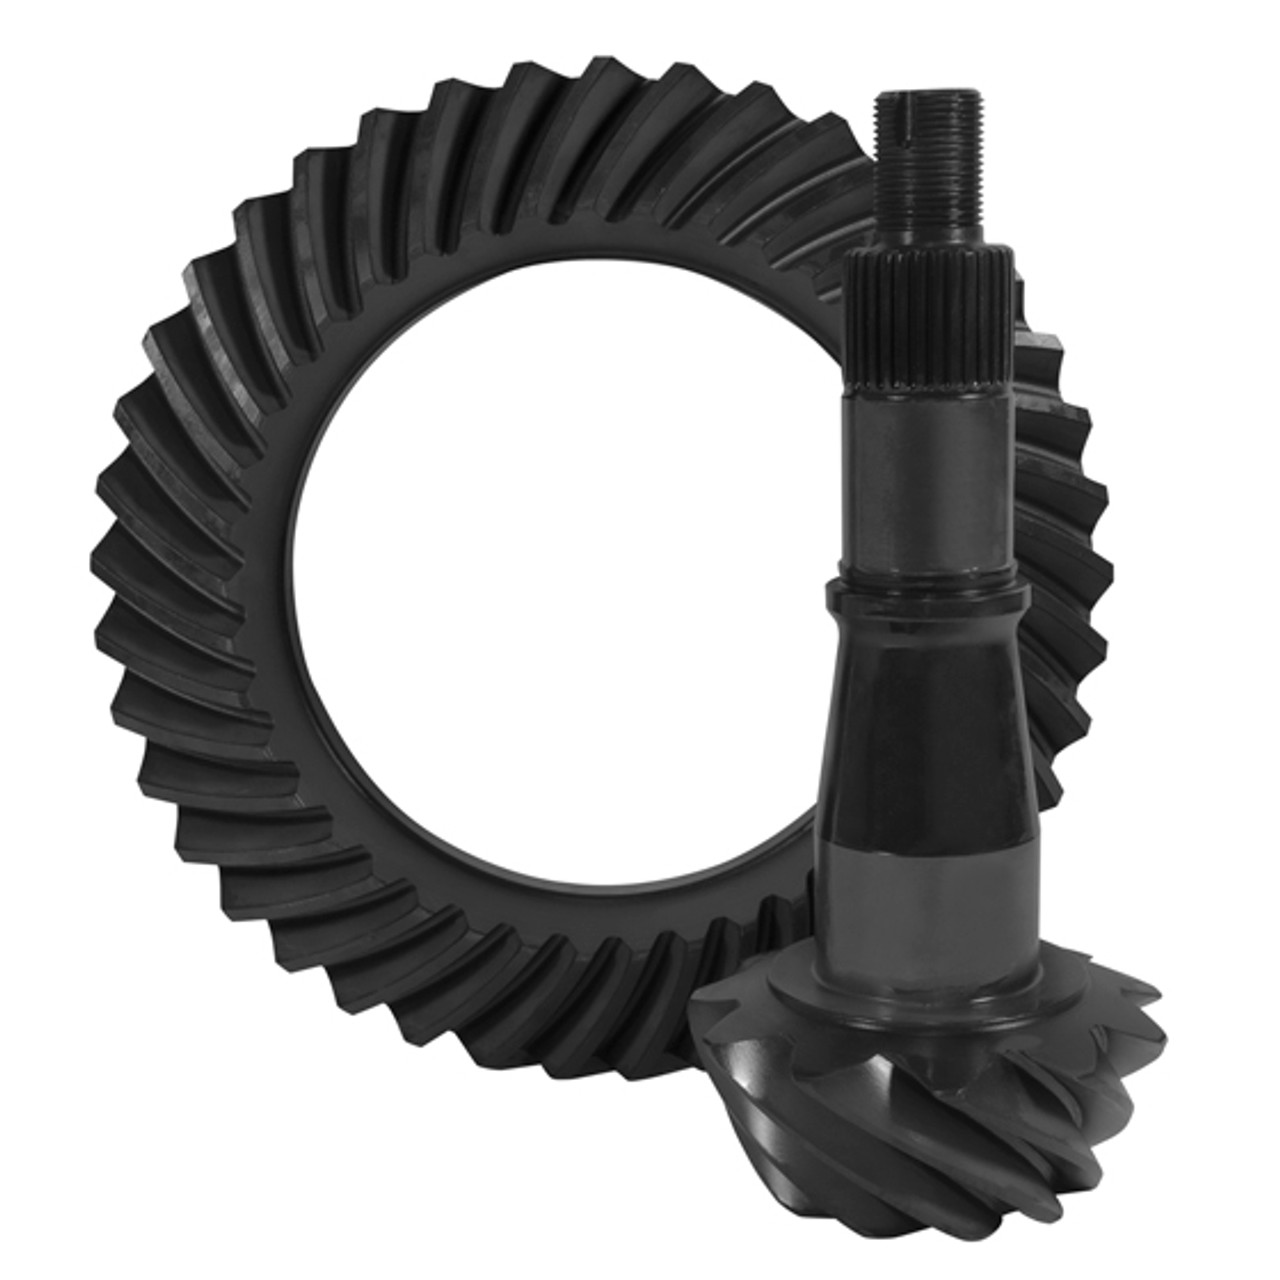 Yukon High Performance Ring & Pinion Gear Set for 2014 & up GM 9.5" in a 3.73 ratio